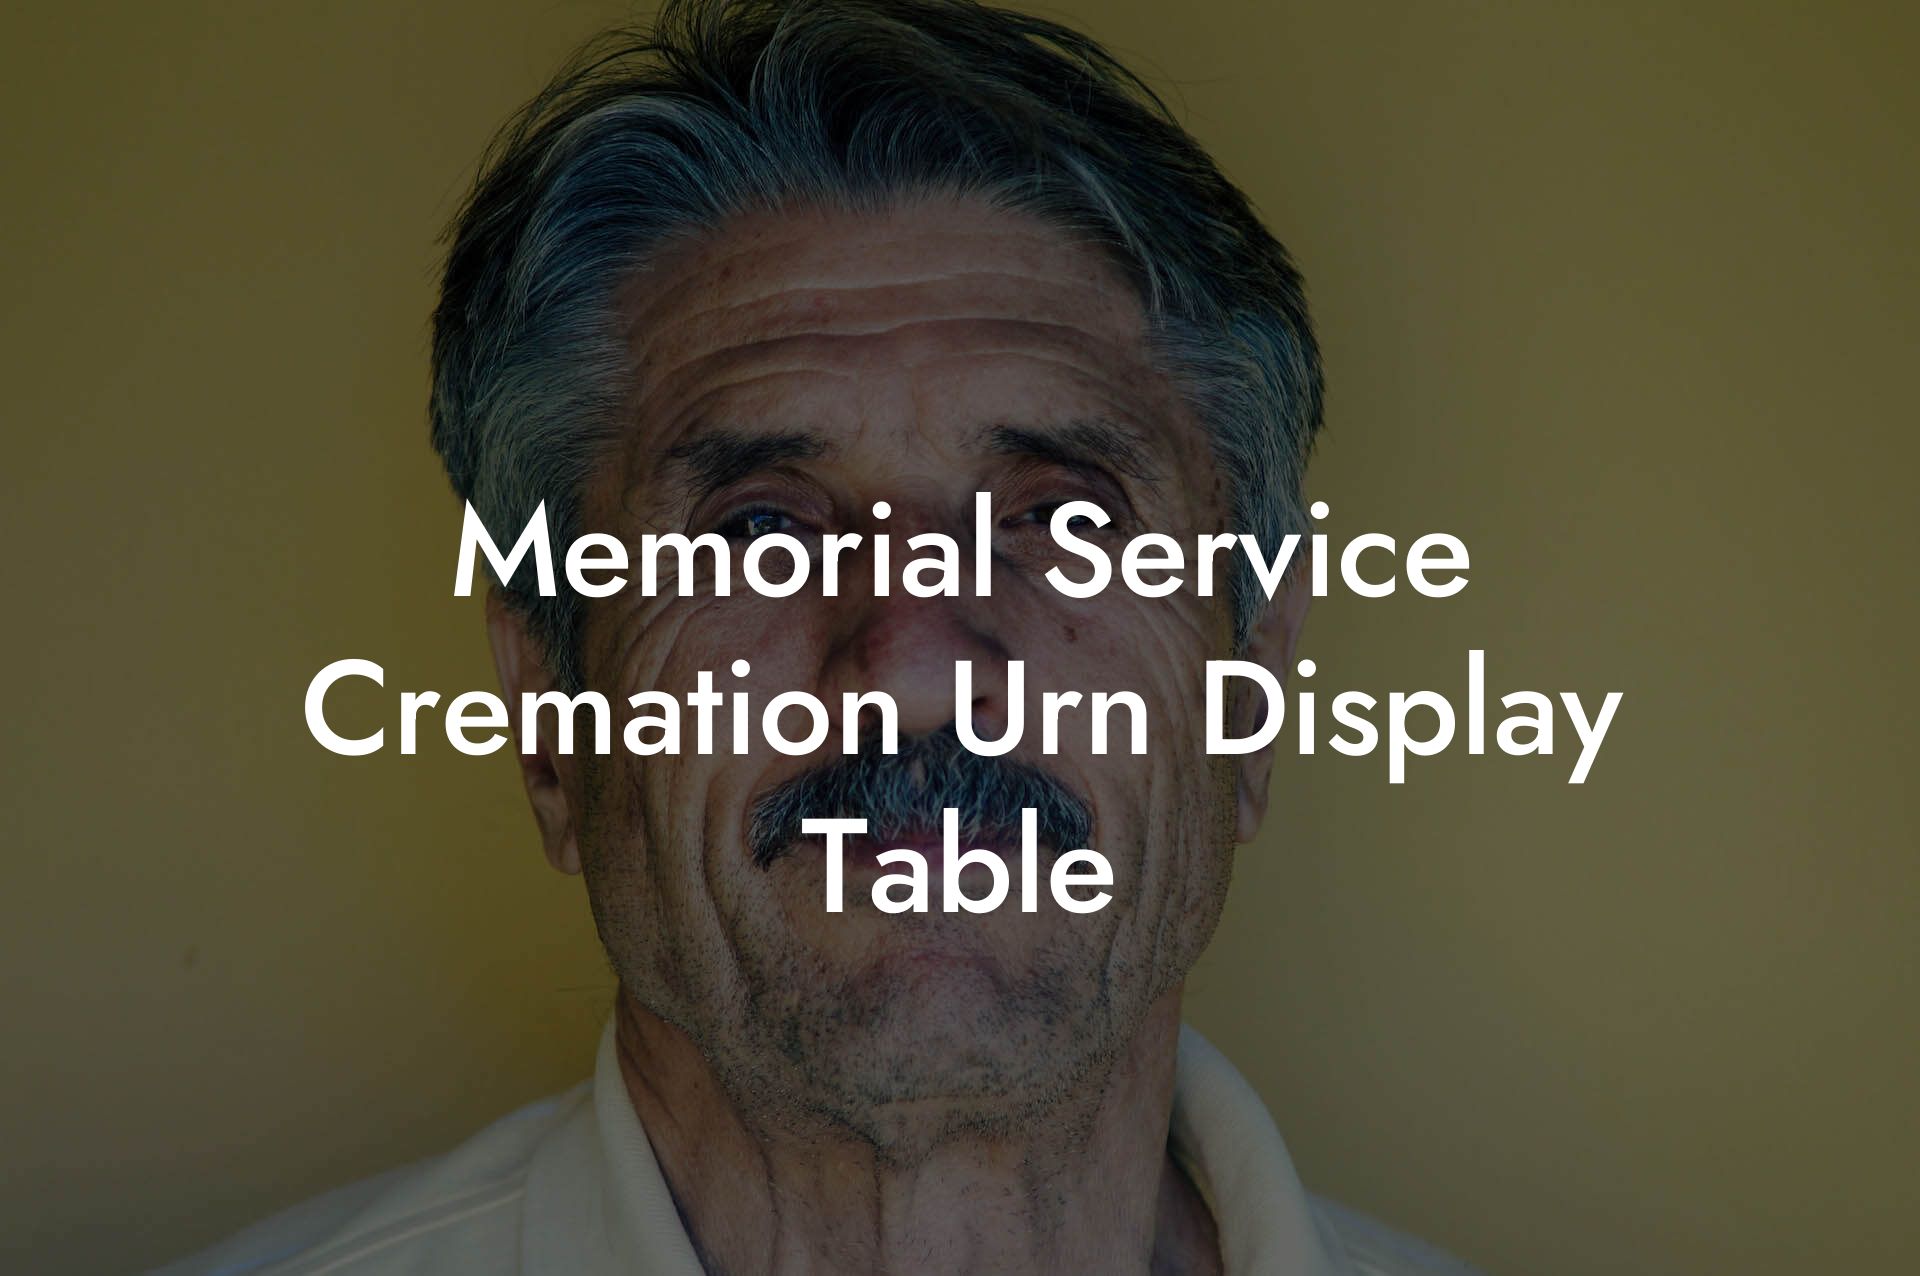 Memorial Service Cremation Urn Display Table